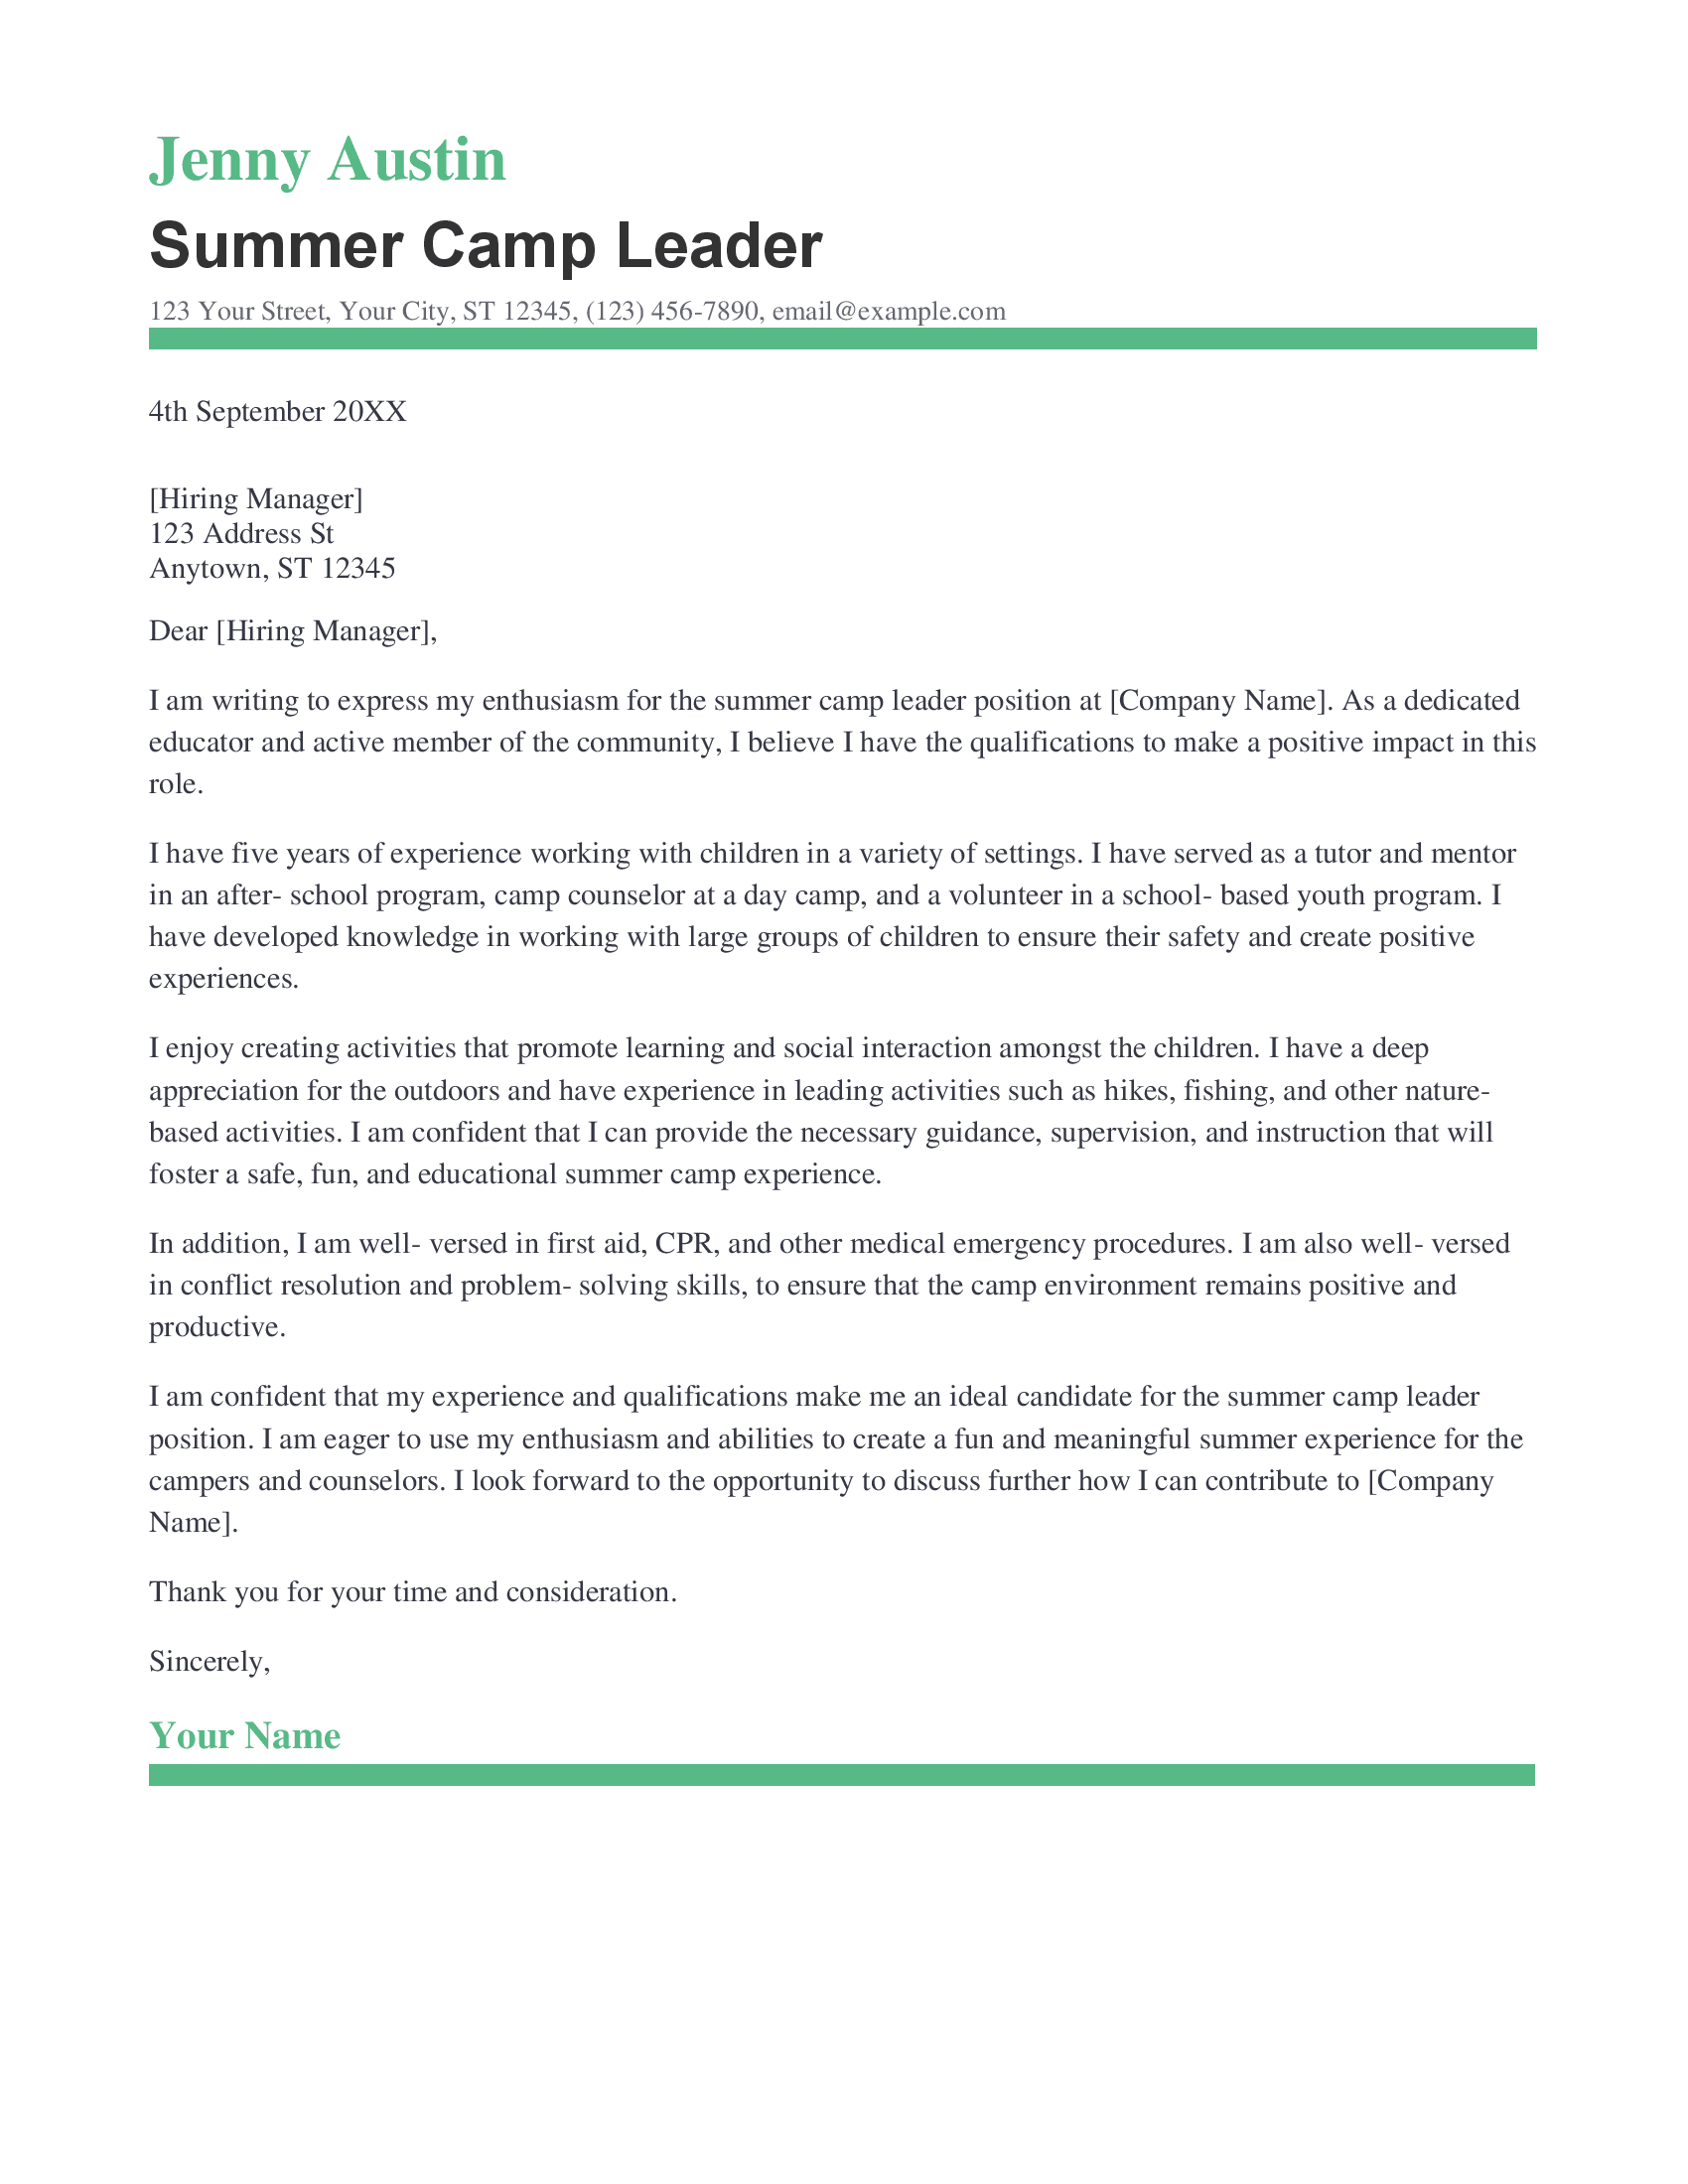 cover letter for a summer camp job